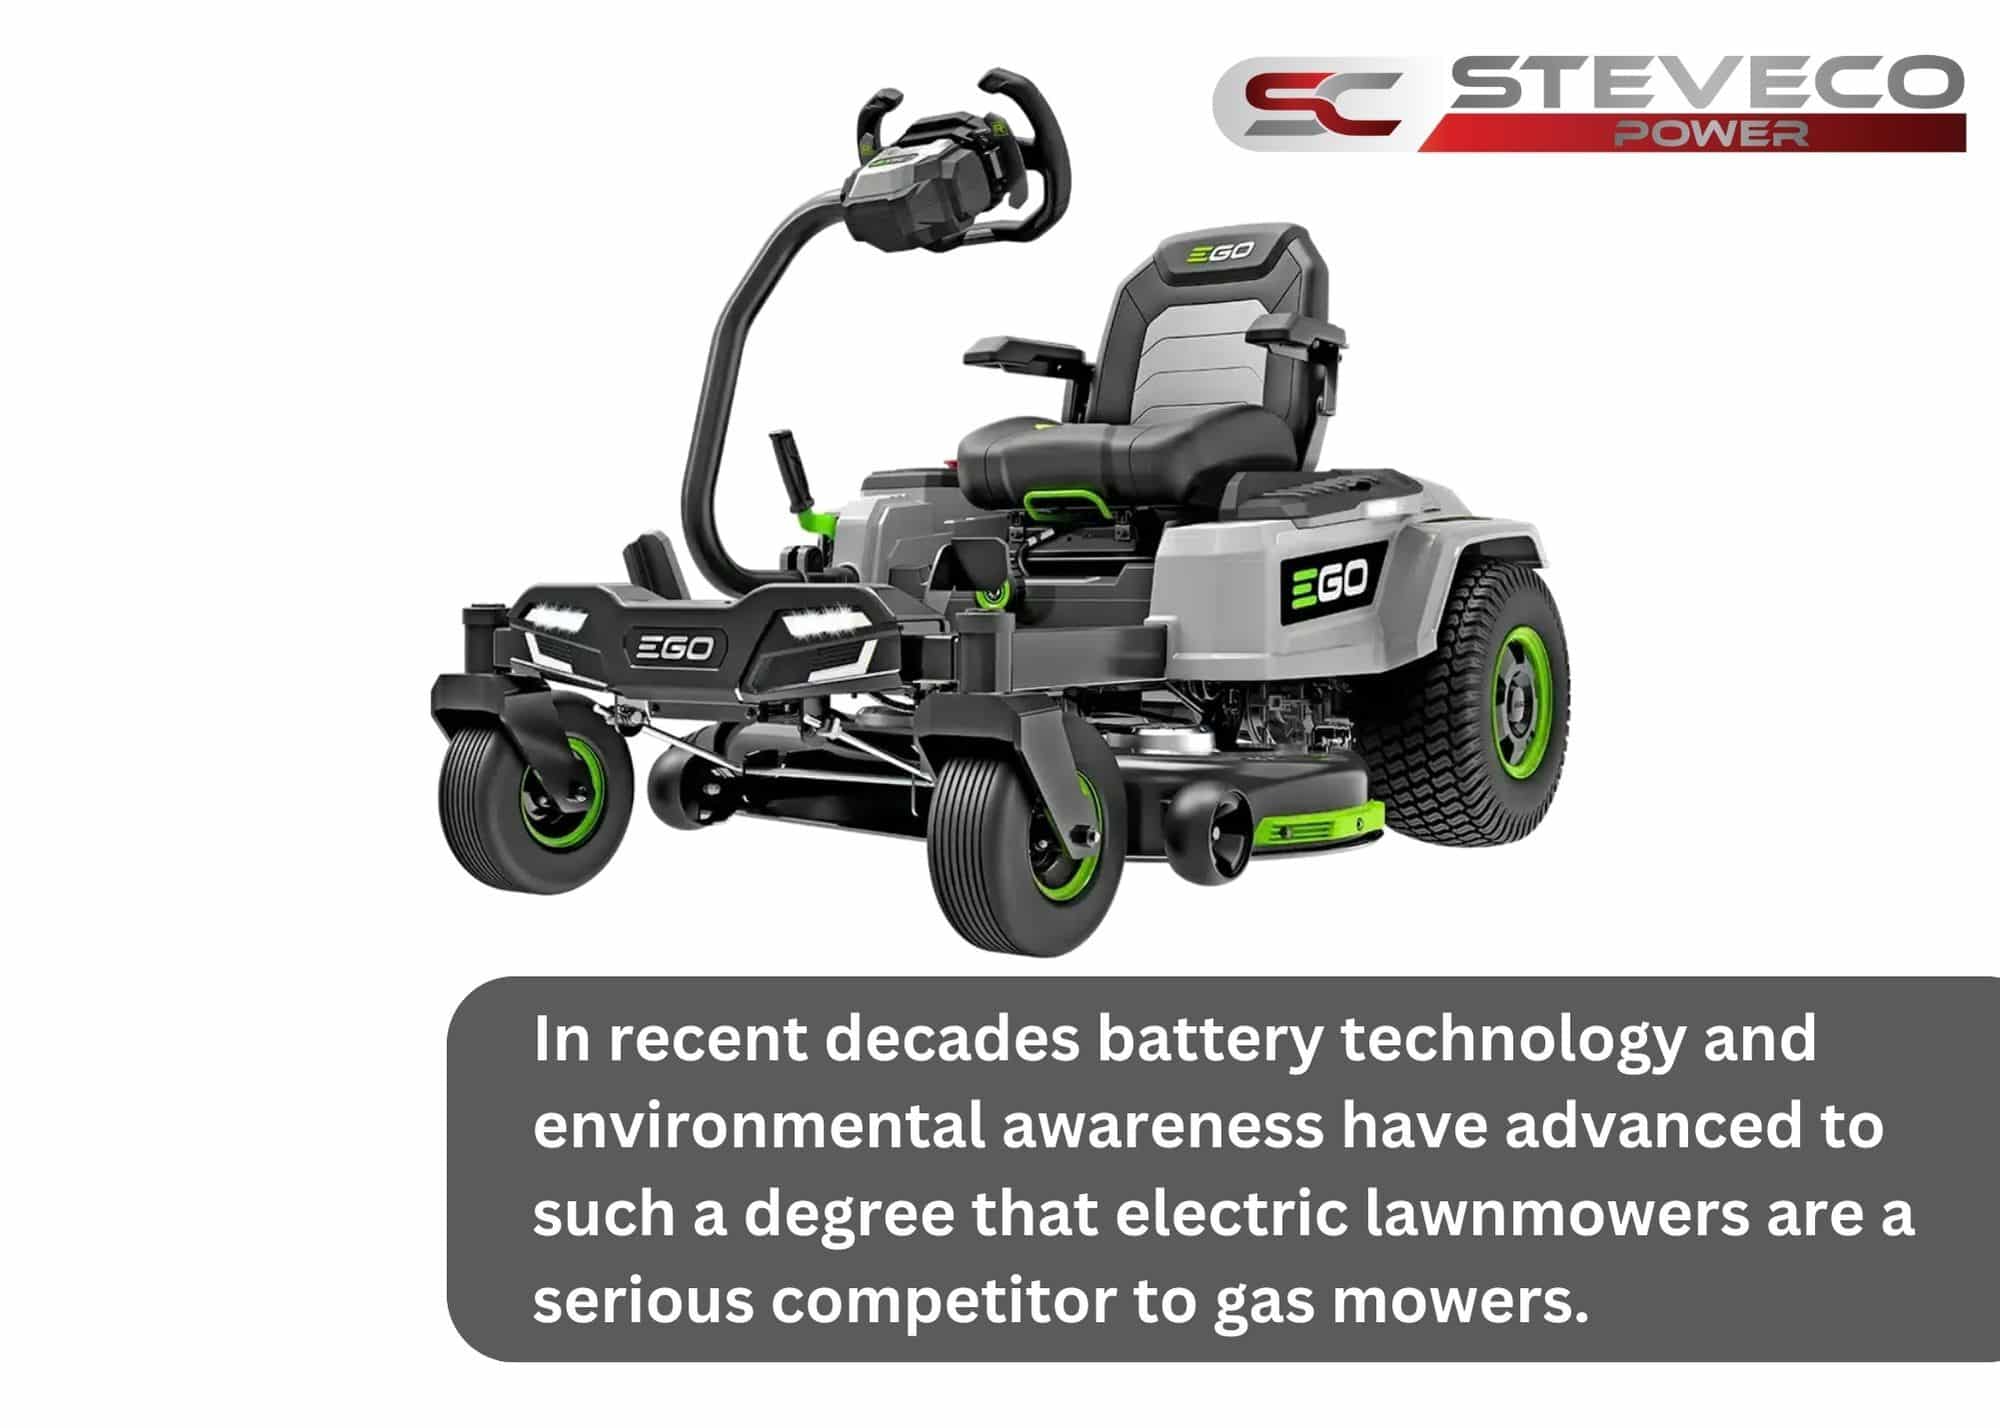 In recent decades battery technology and environmental awareness have advanced to such a degree that electric lawnmowers are a serious competitor to gas mowers (1)